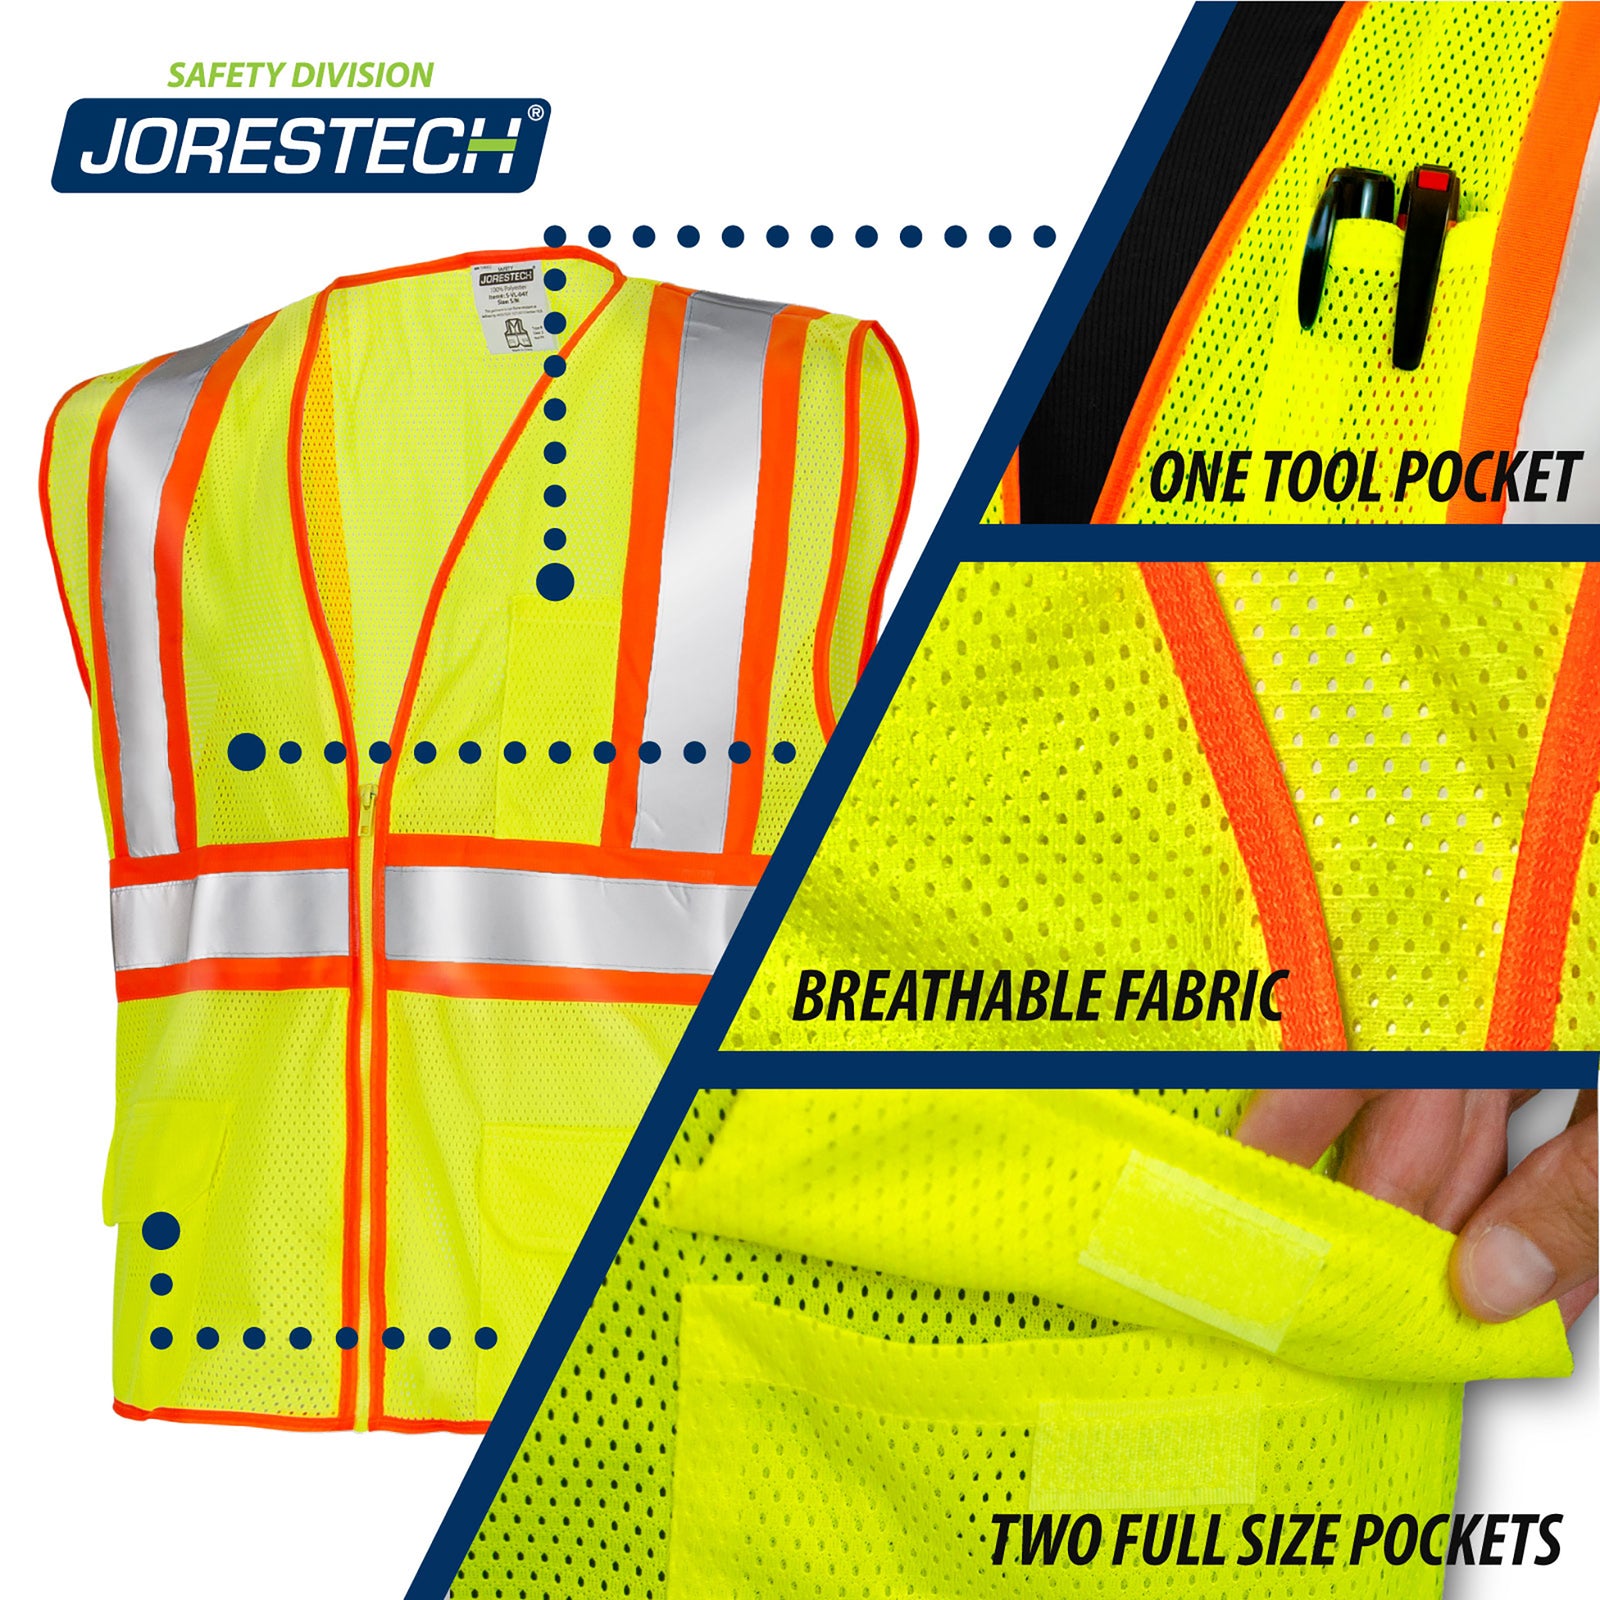 Image of the lime safety vest with 3 call outs one tool pocket, breathable fabric, two full size pockets.